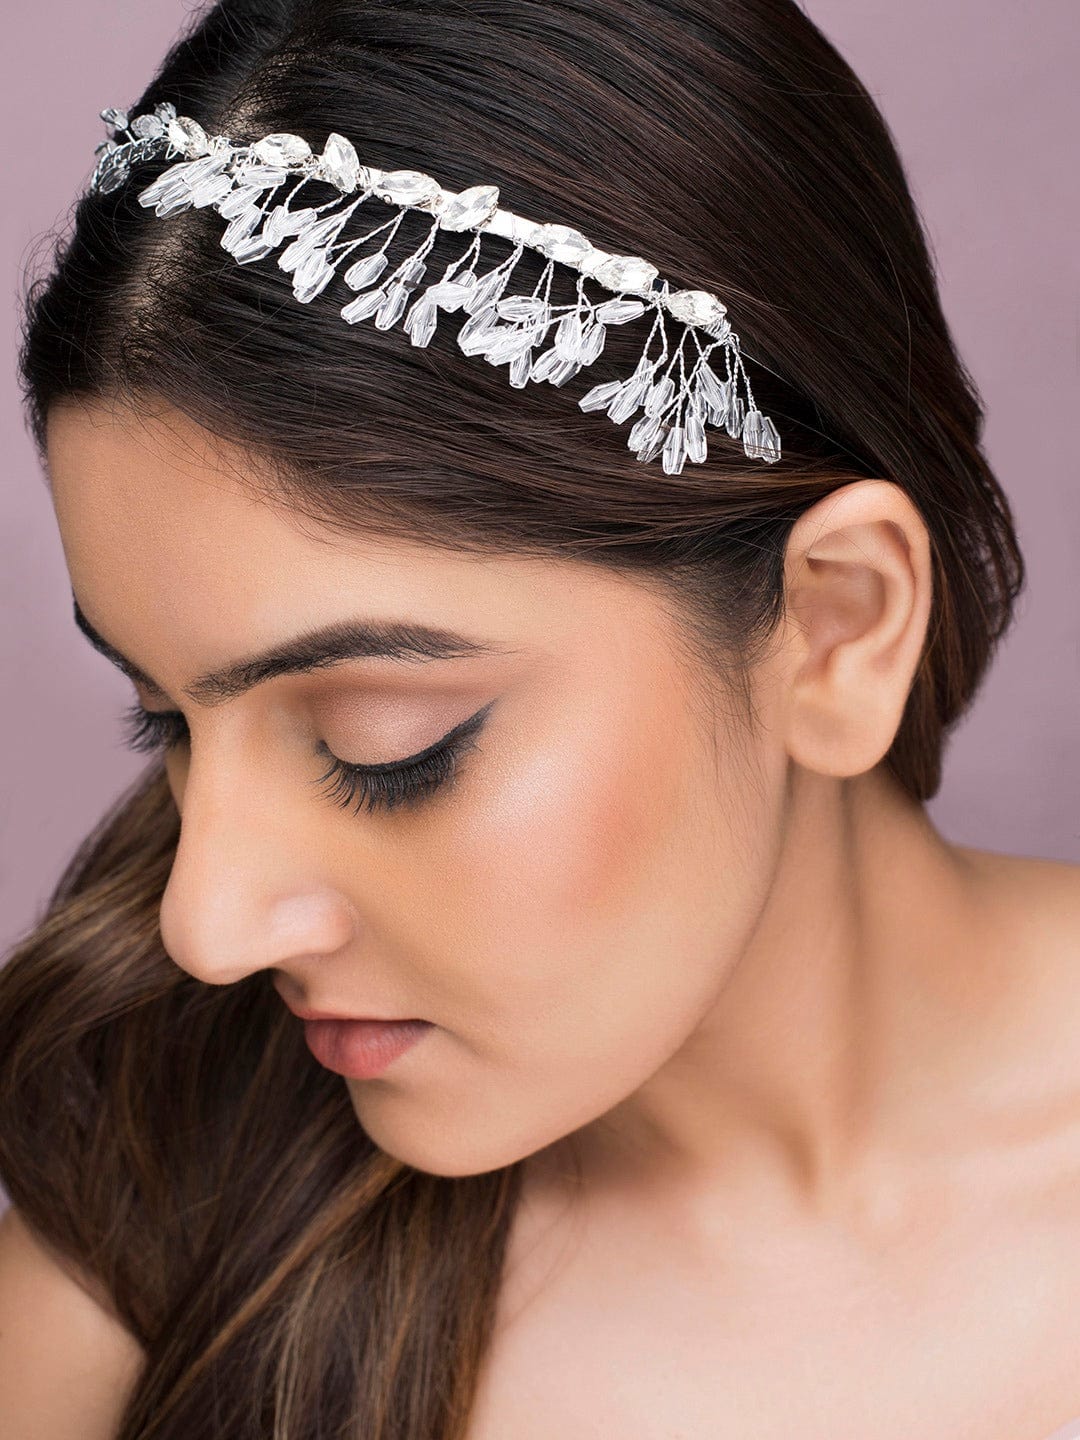 Rubans Women Silver-Plated Hair Band With Transparent Crystals Design.